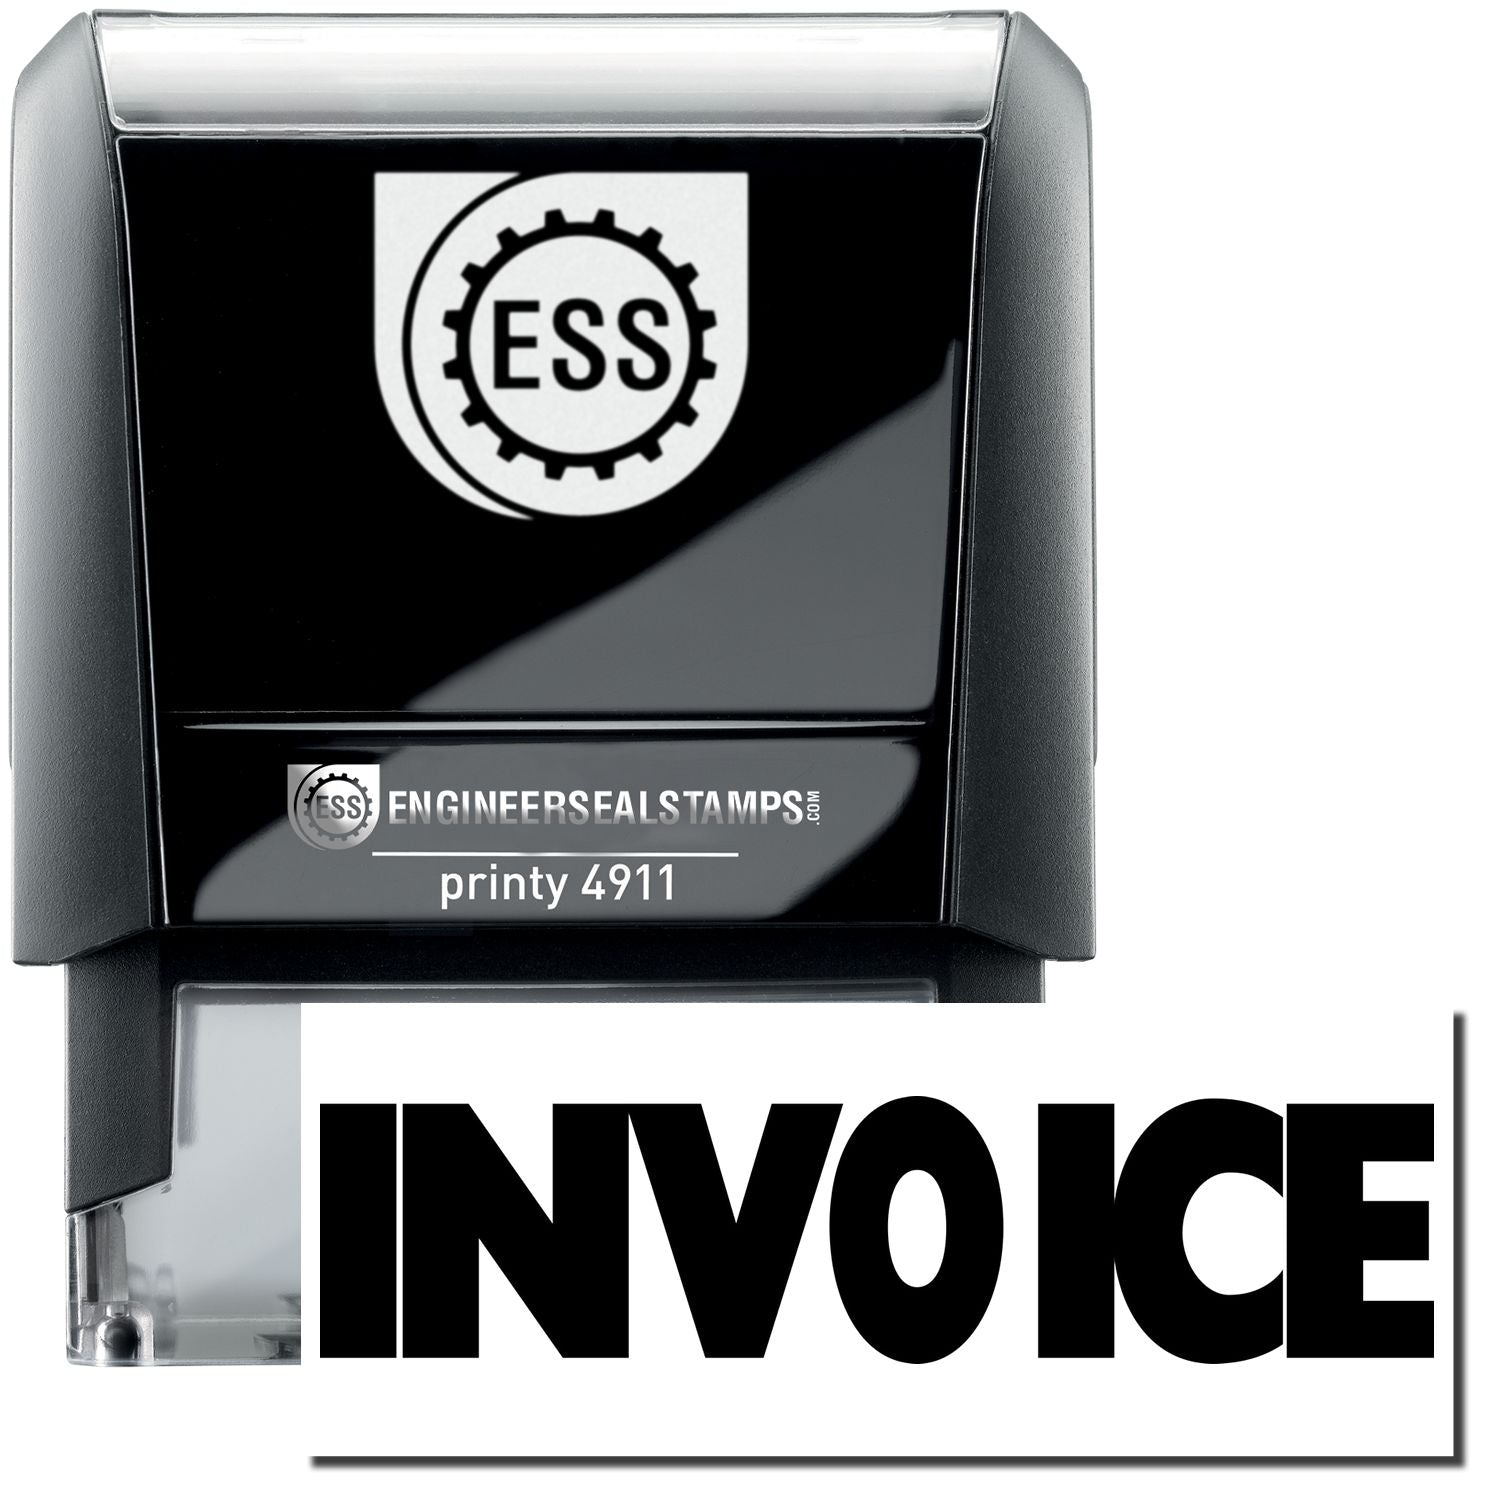 A self-inking stamp with a stamped image showing how the text "INVOICE" is displayed after stamping.